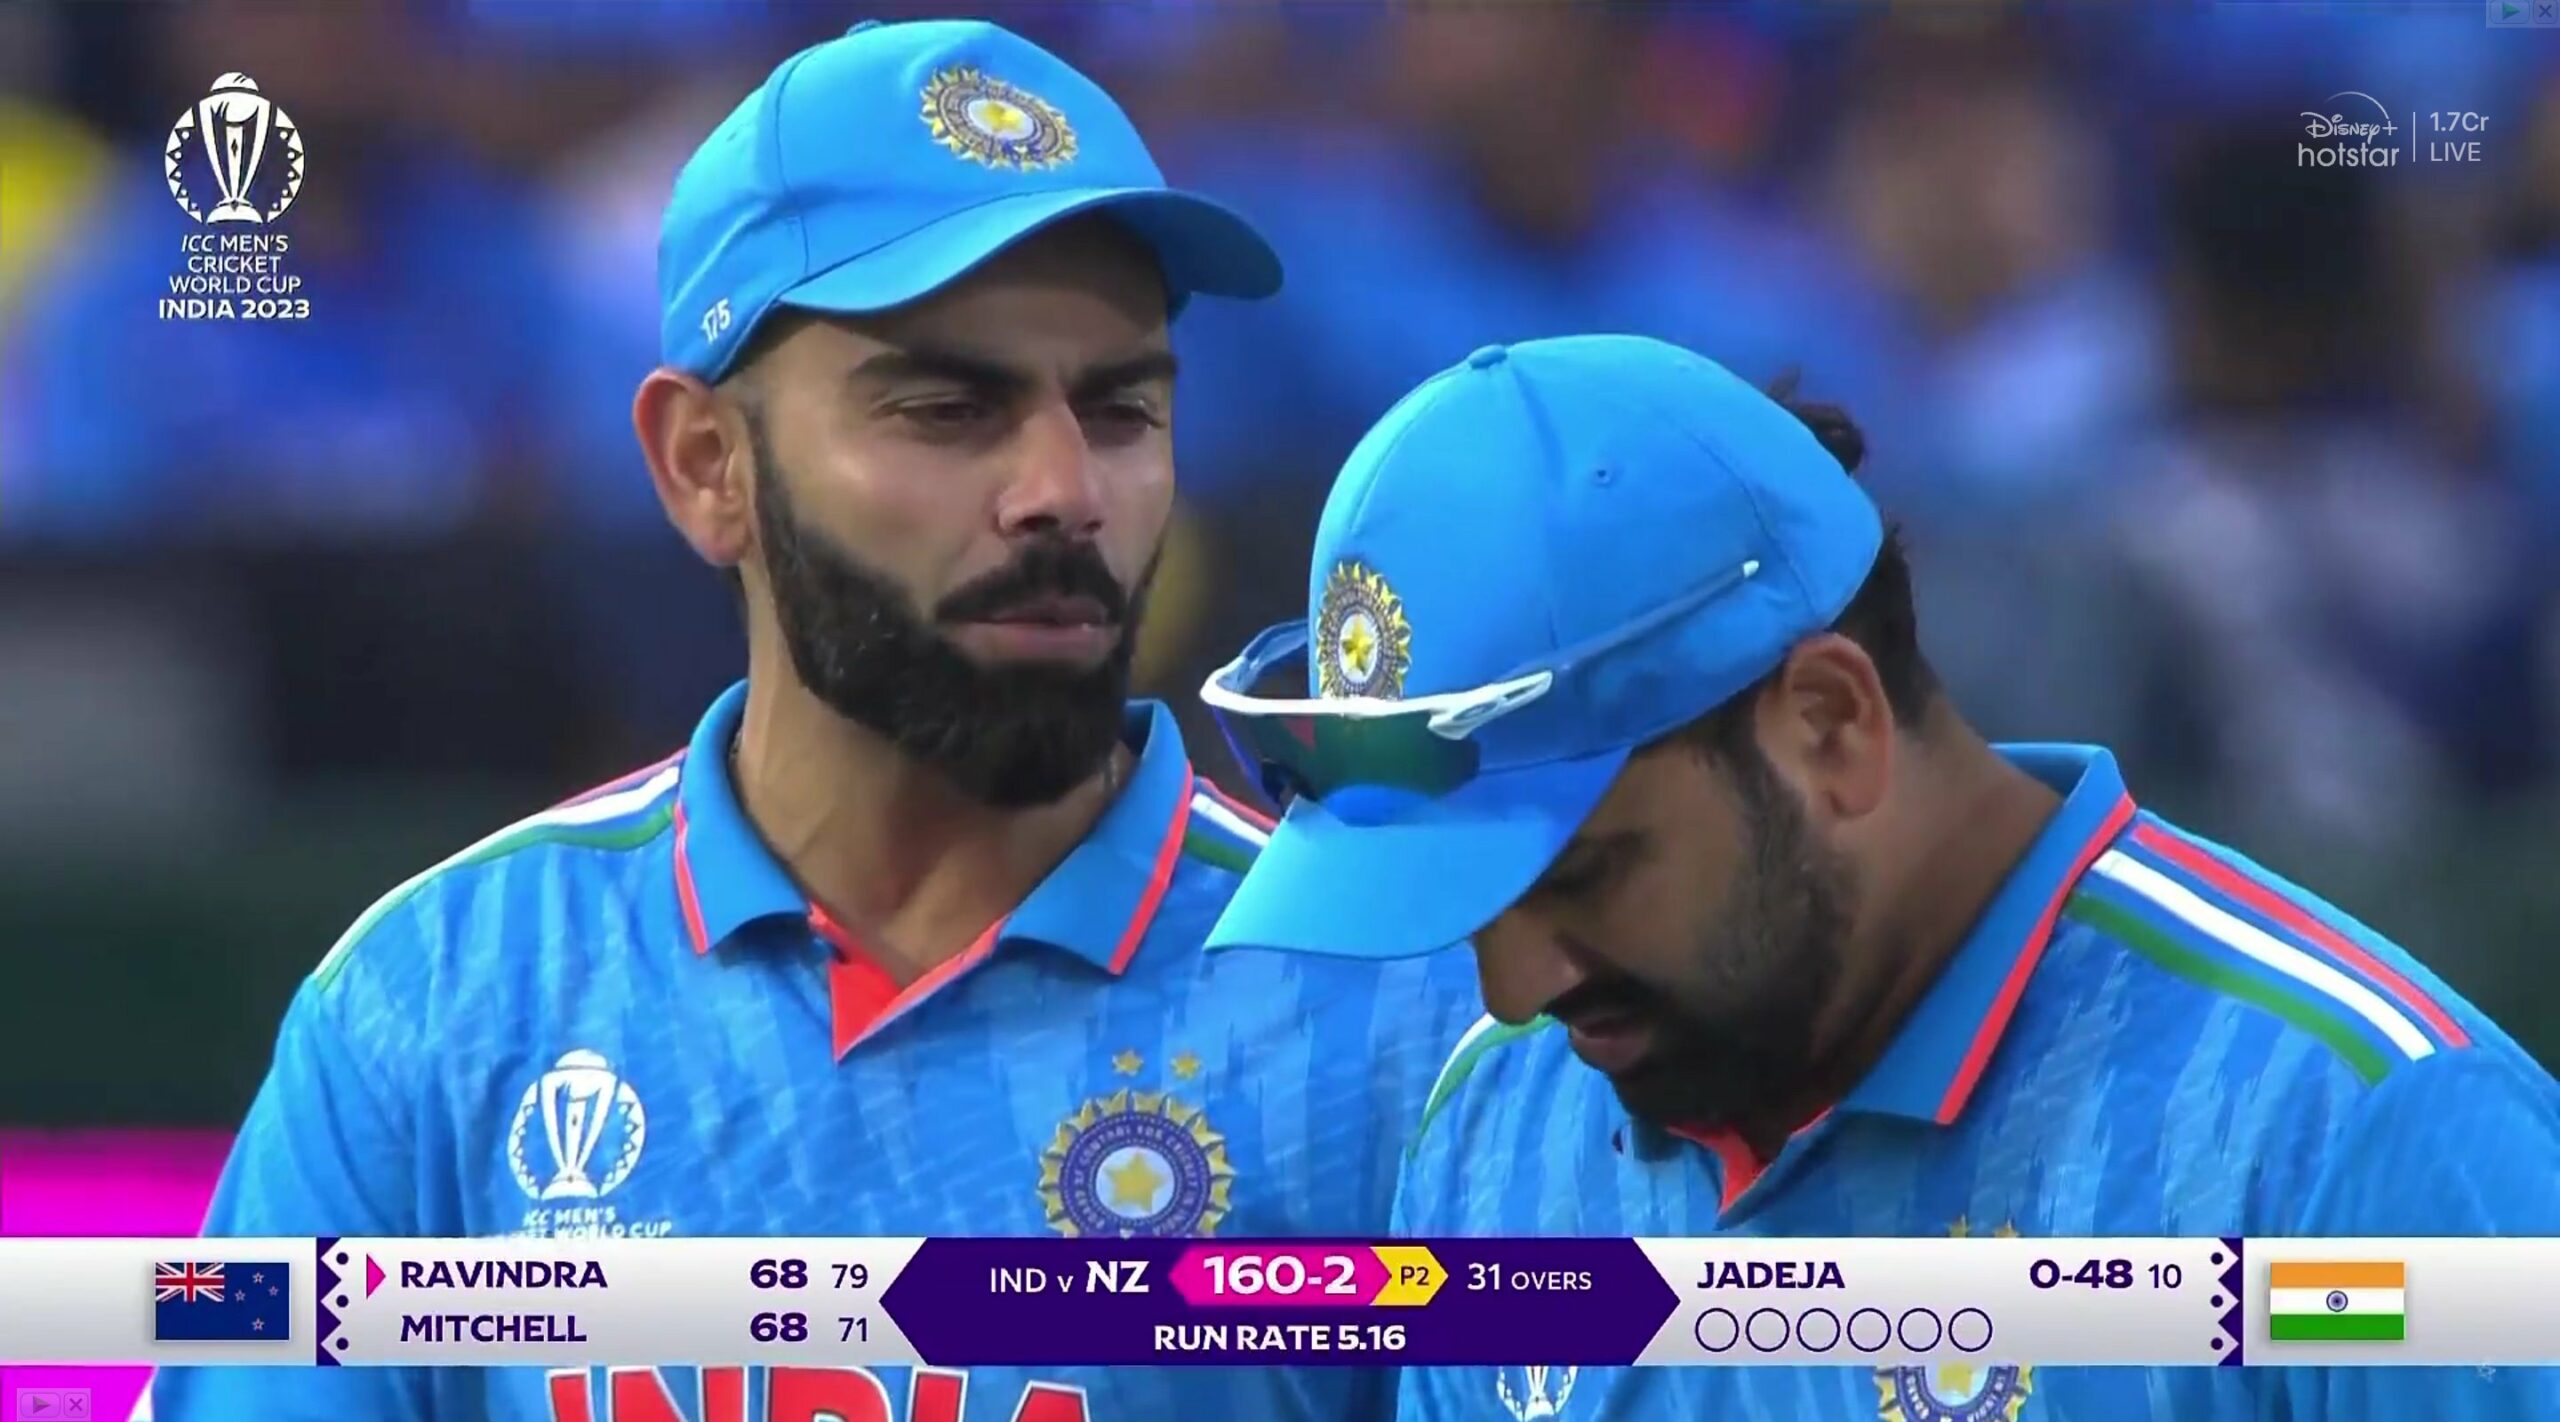 rohit-sharma-and-virat-kohli-fought-during-ind-vs-nz-match-video-goes-viral